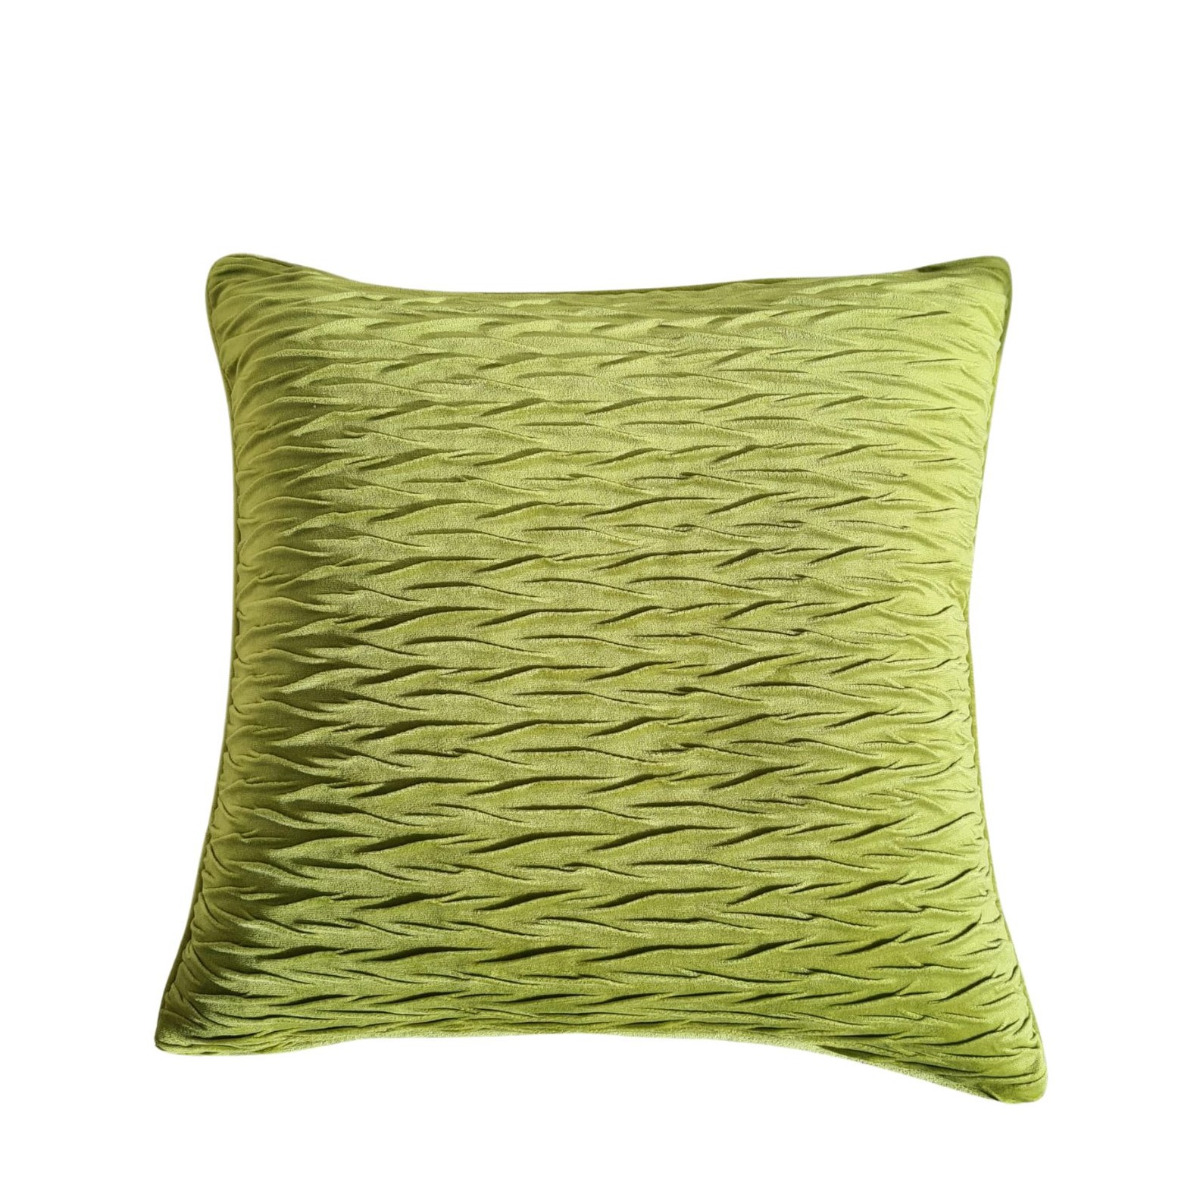 Defined Wave Lime Cushion